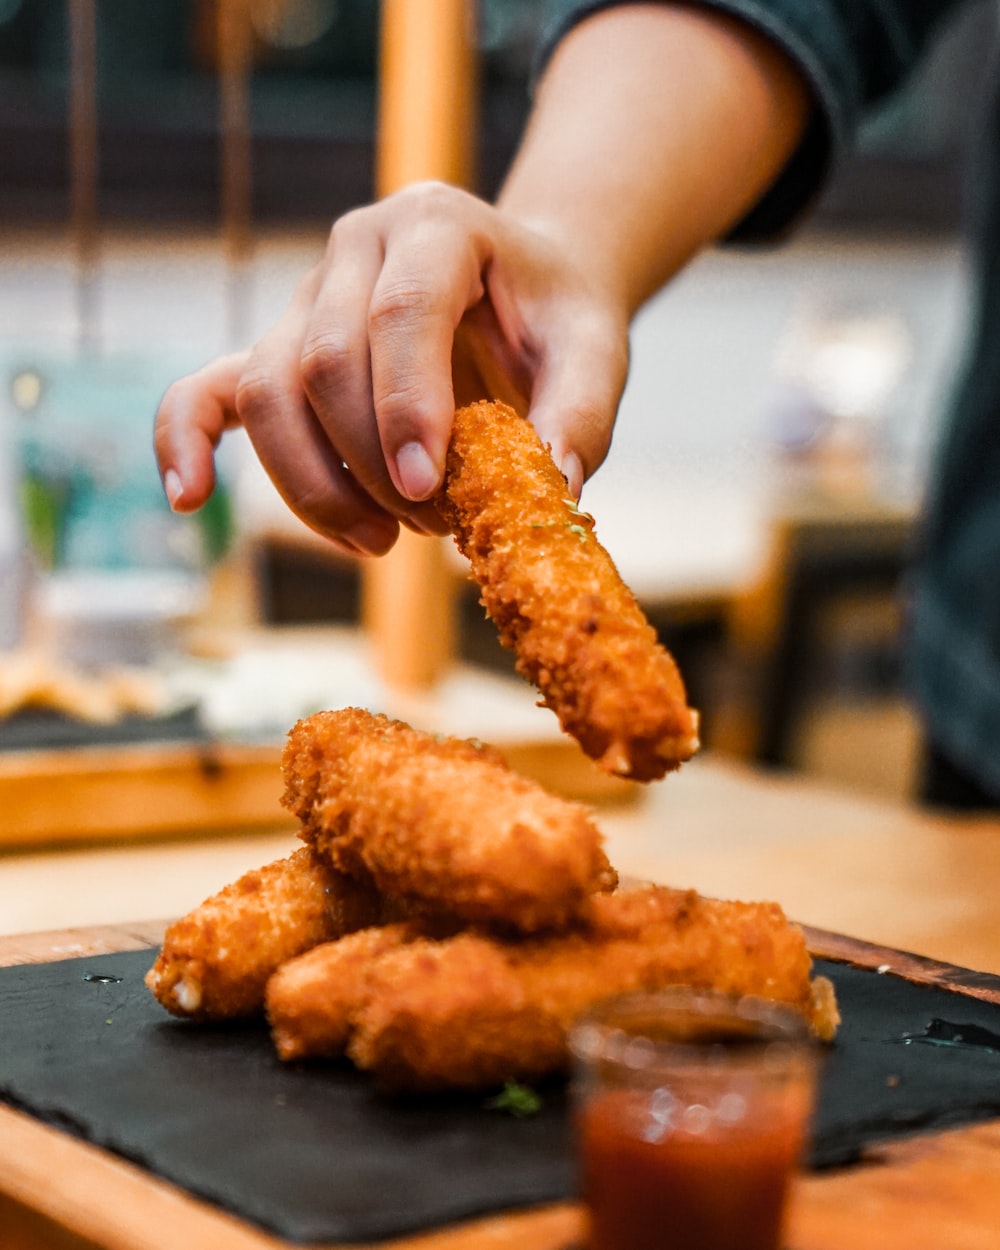 5 Cons Of Over-Eating Fried Food